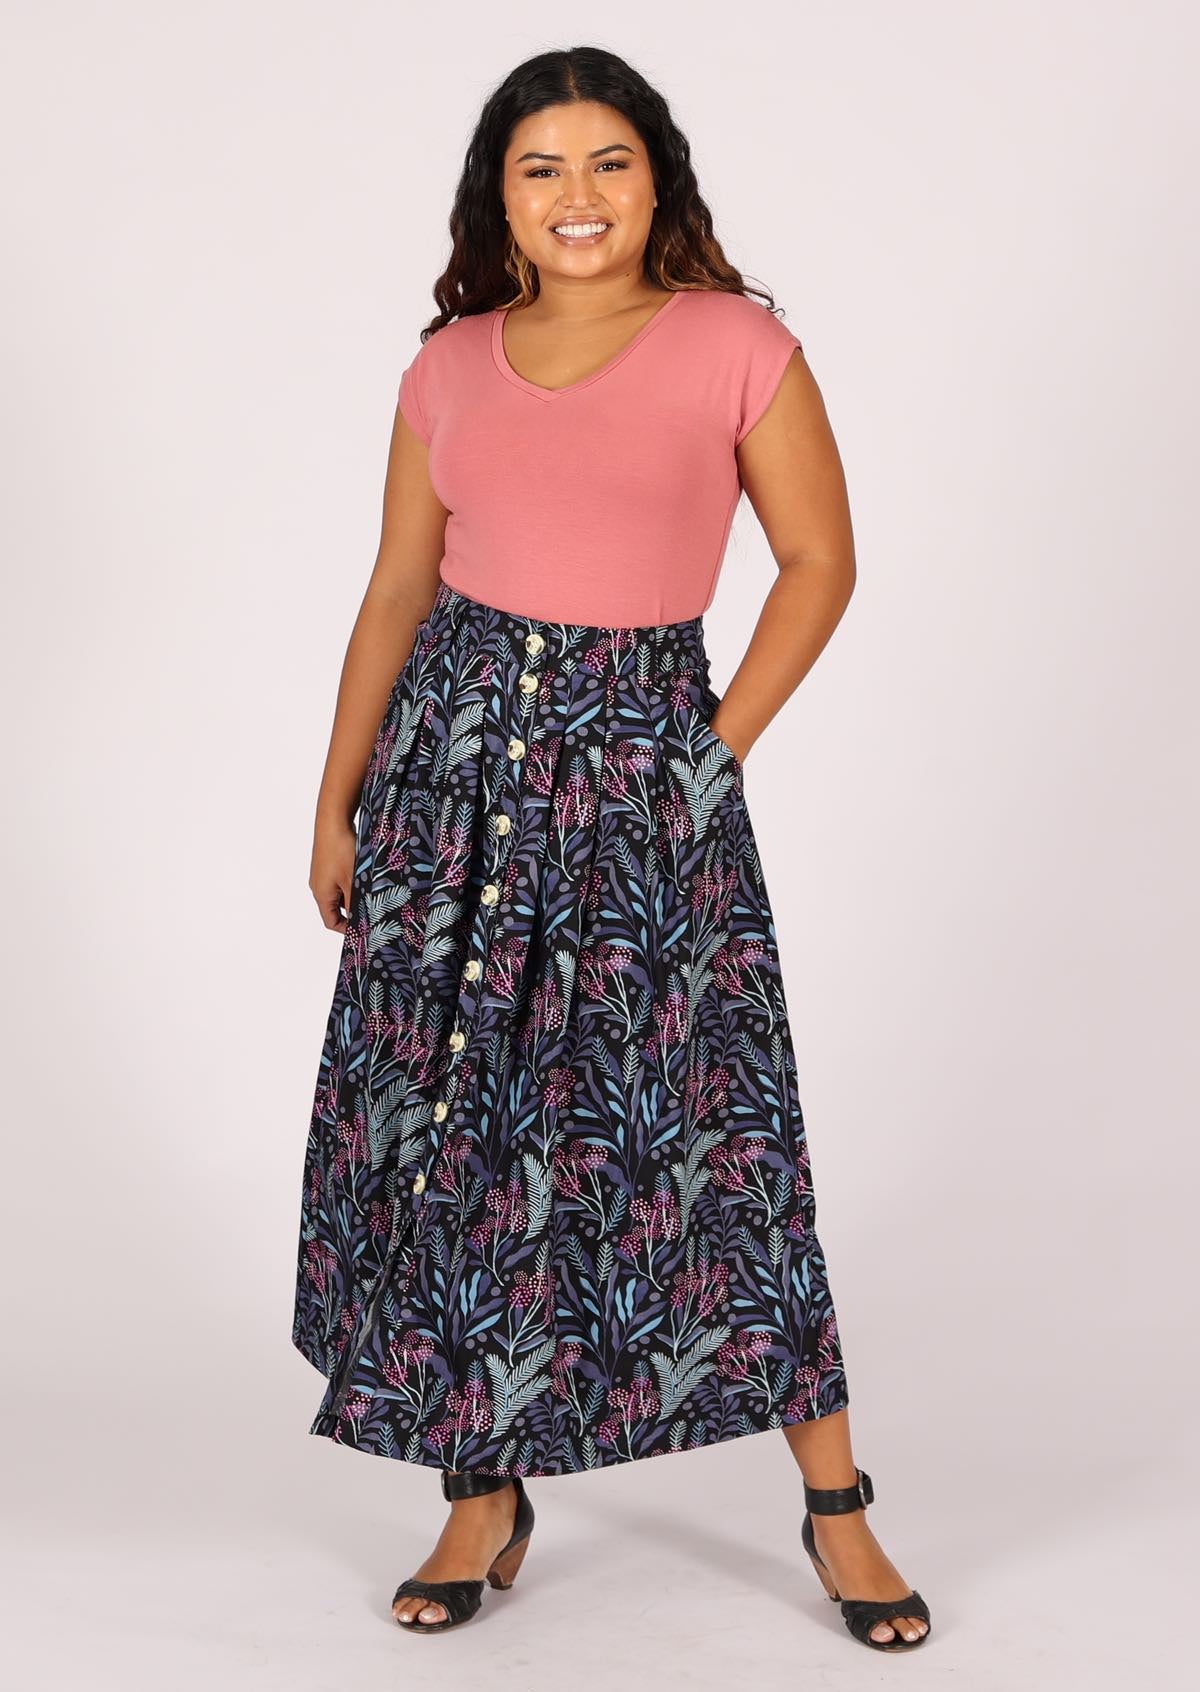 Cotton shin length skirt with buttons, belt loops and pockets